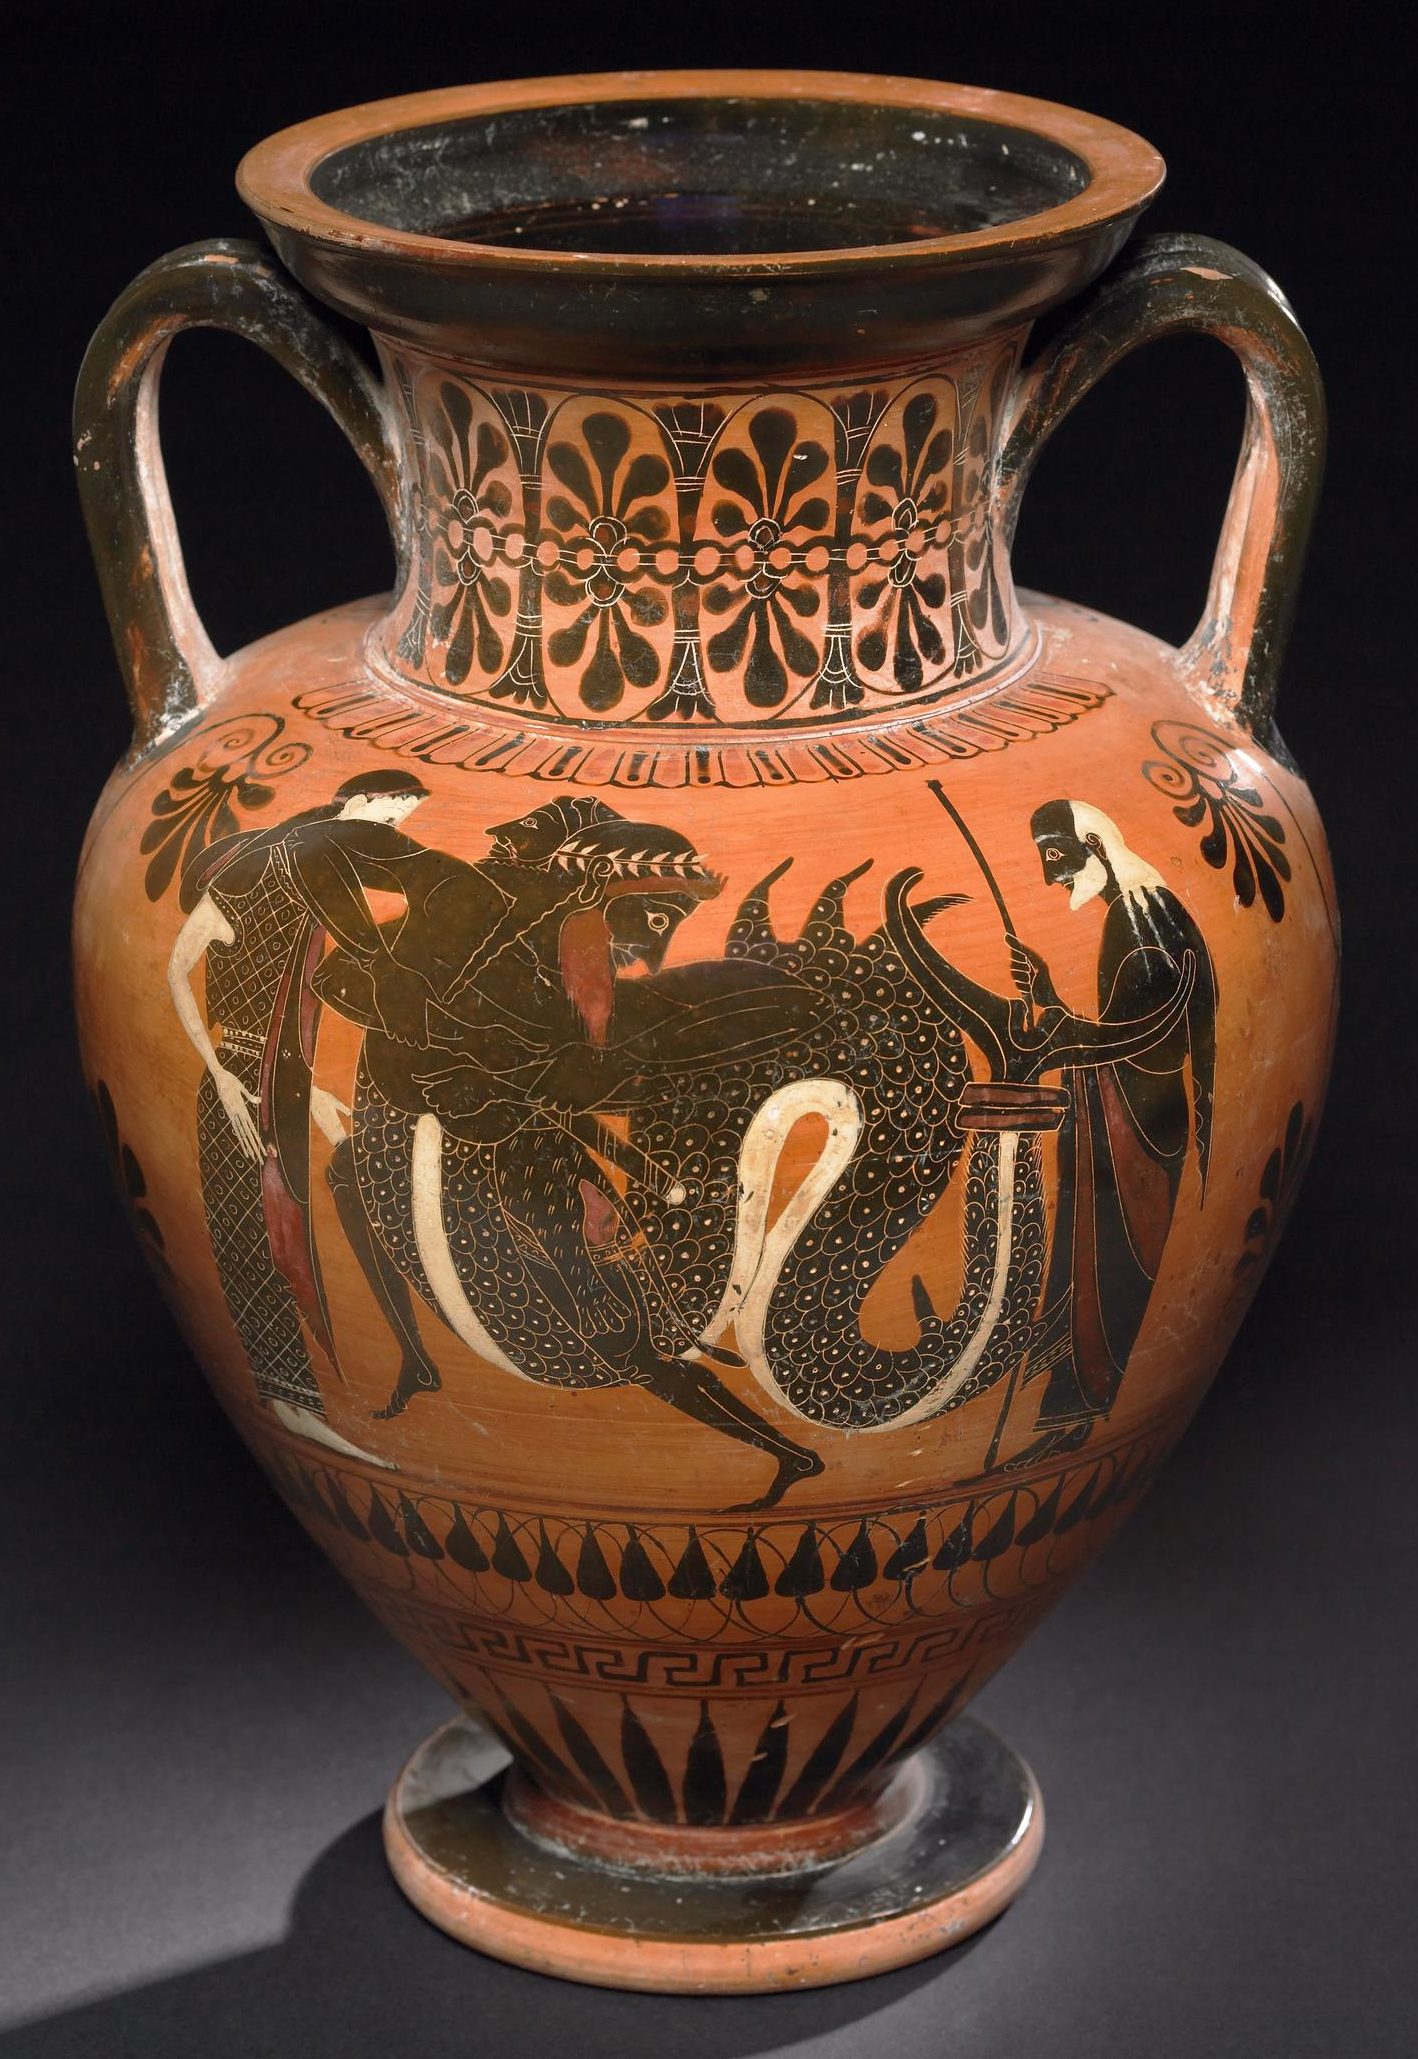 Heracles with his arms wrapped around Triton as the two wrestle. To the right stands Nereus, an old man with a white hair and beard, and to the left is another man.